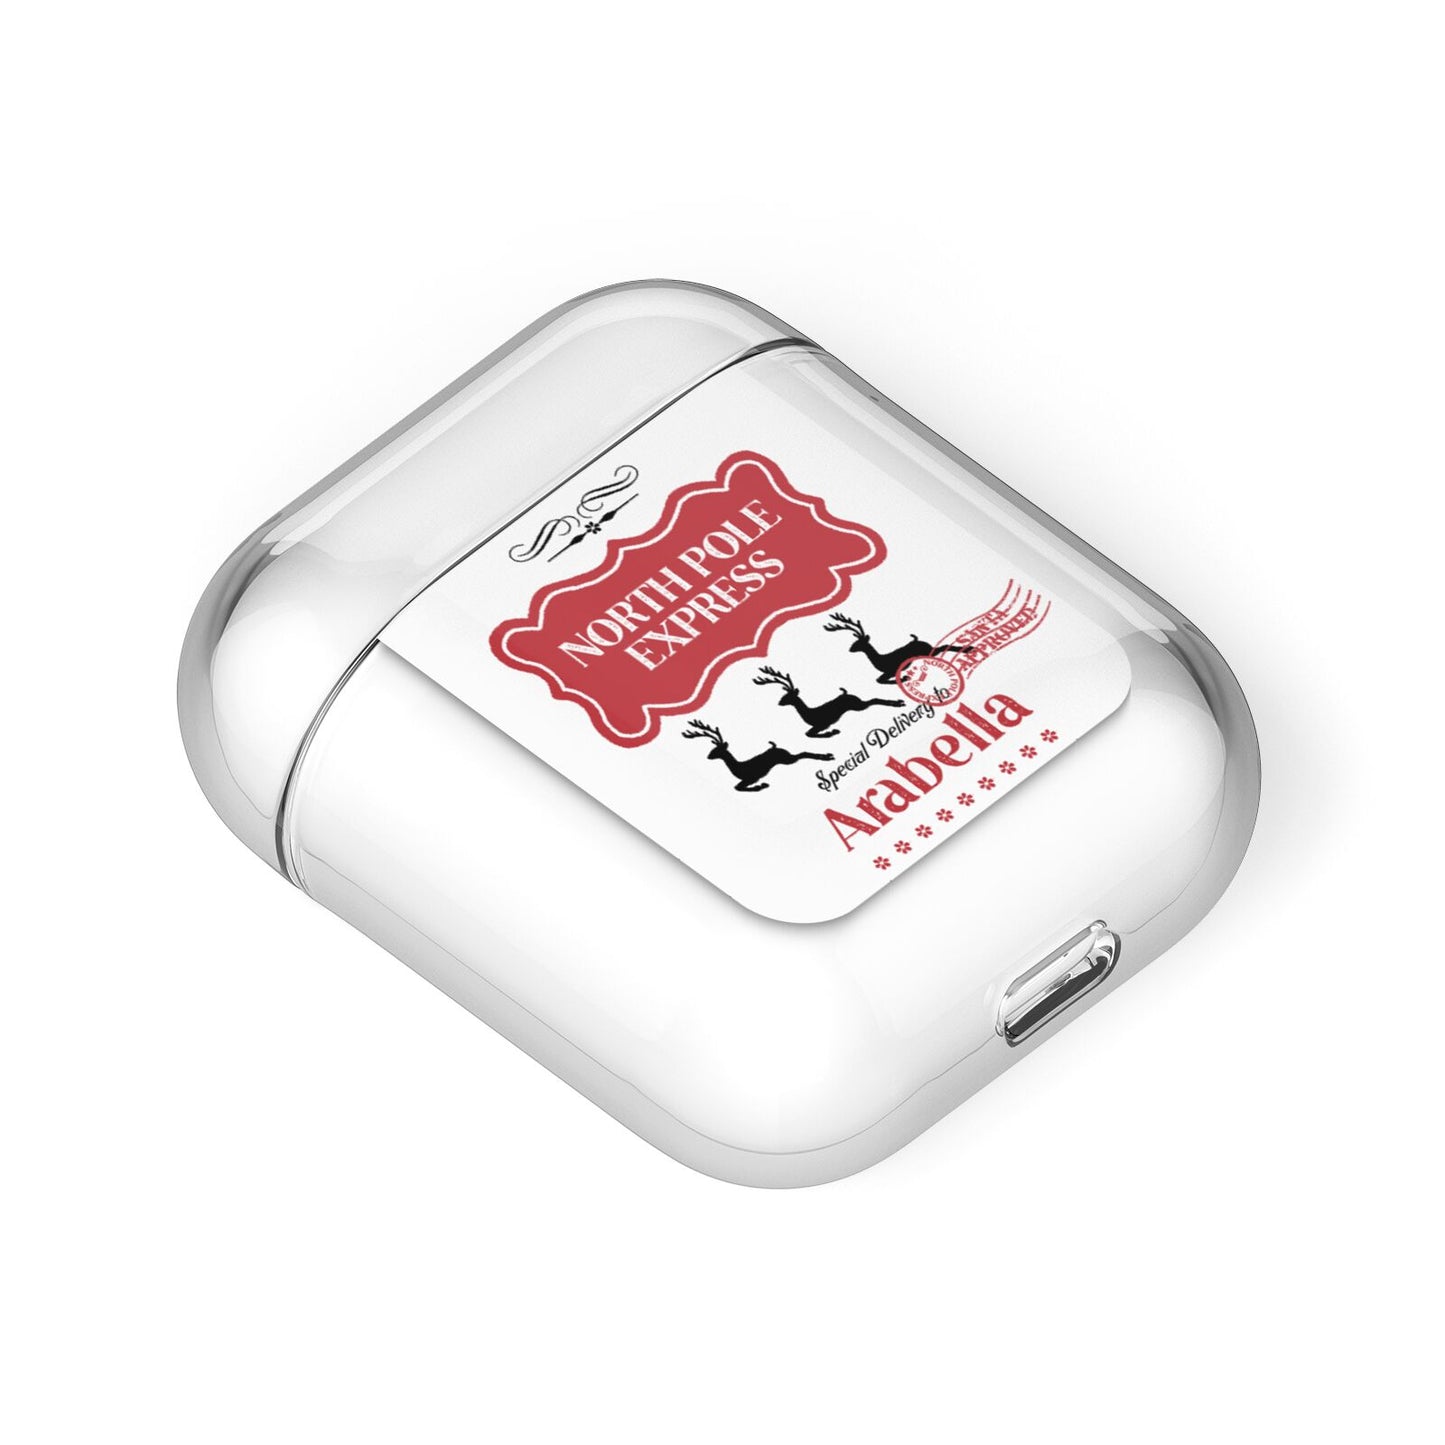 North Pole Express Personalised AirPods Case Laid Flat